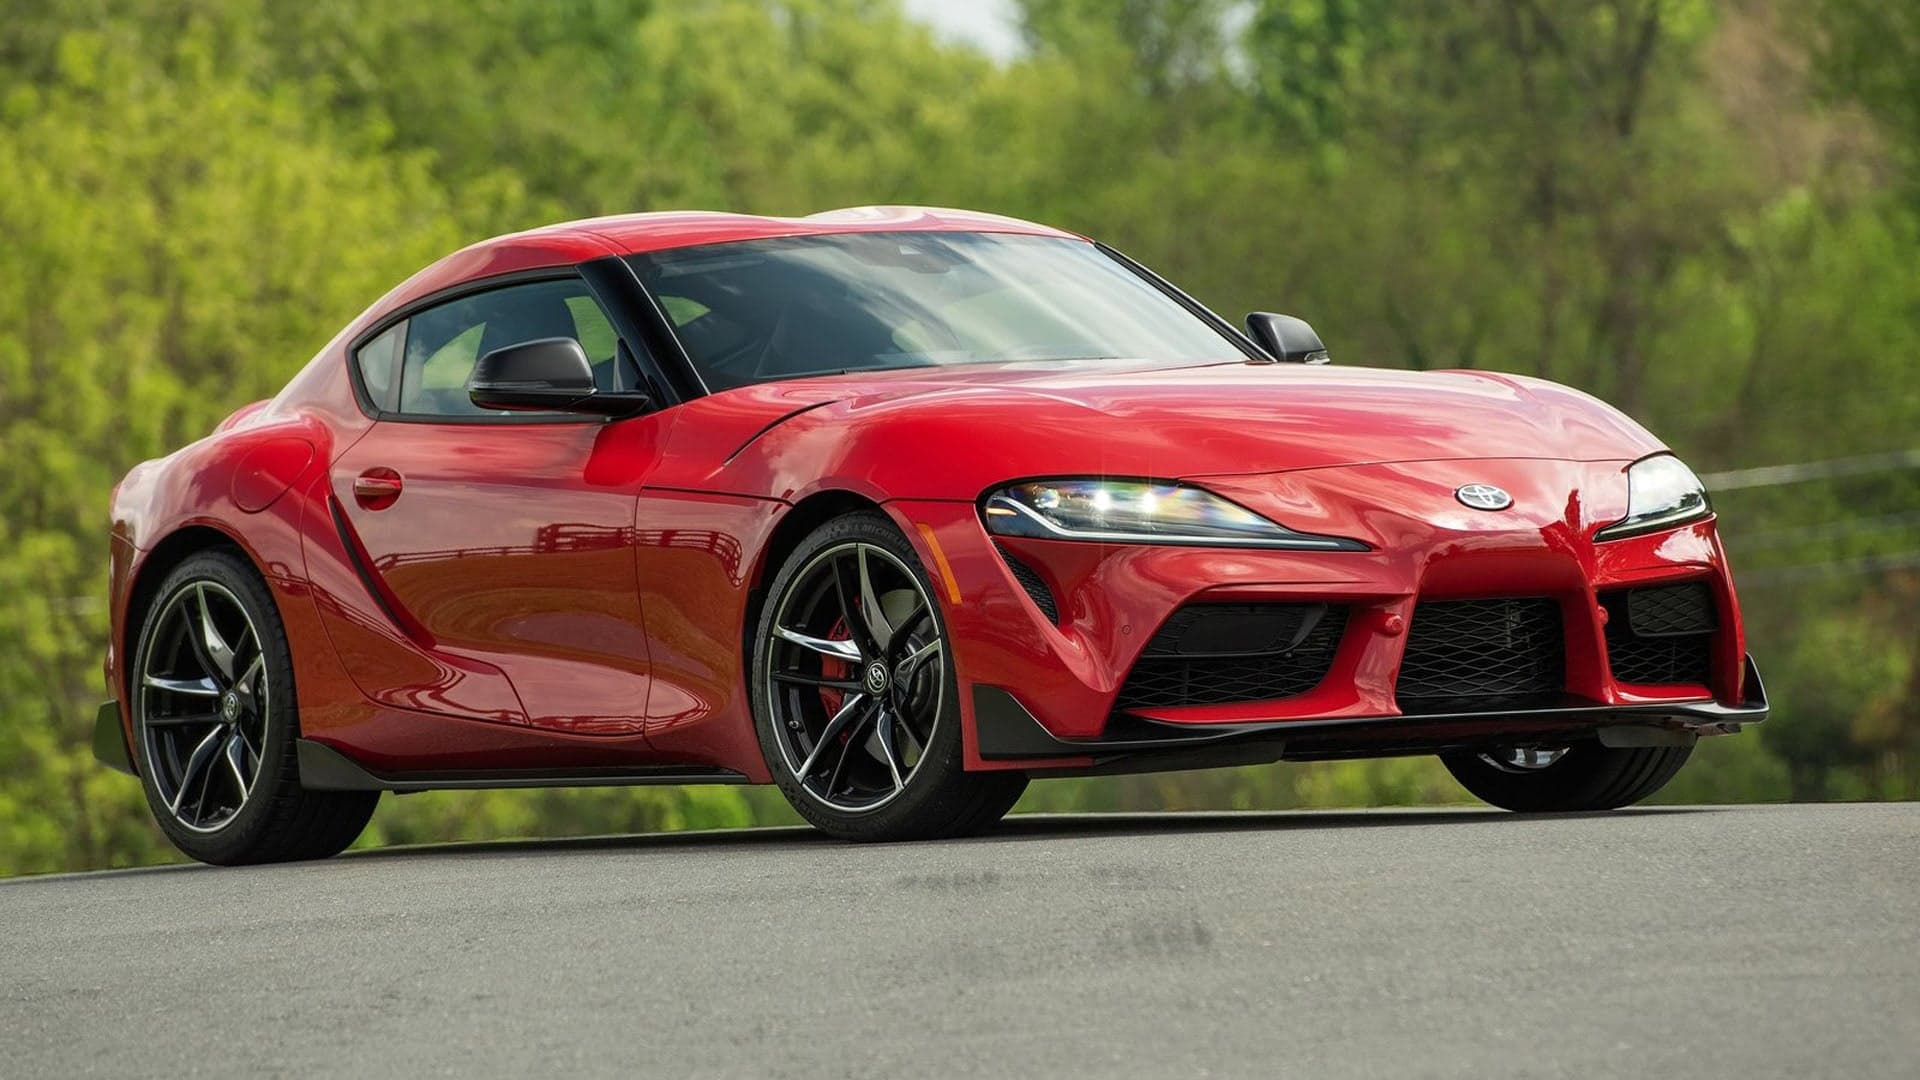 Upcoming Toyota Supra GRMN Will Get the 510-HP BMW M3 Engine: Report